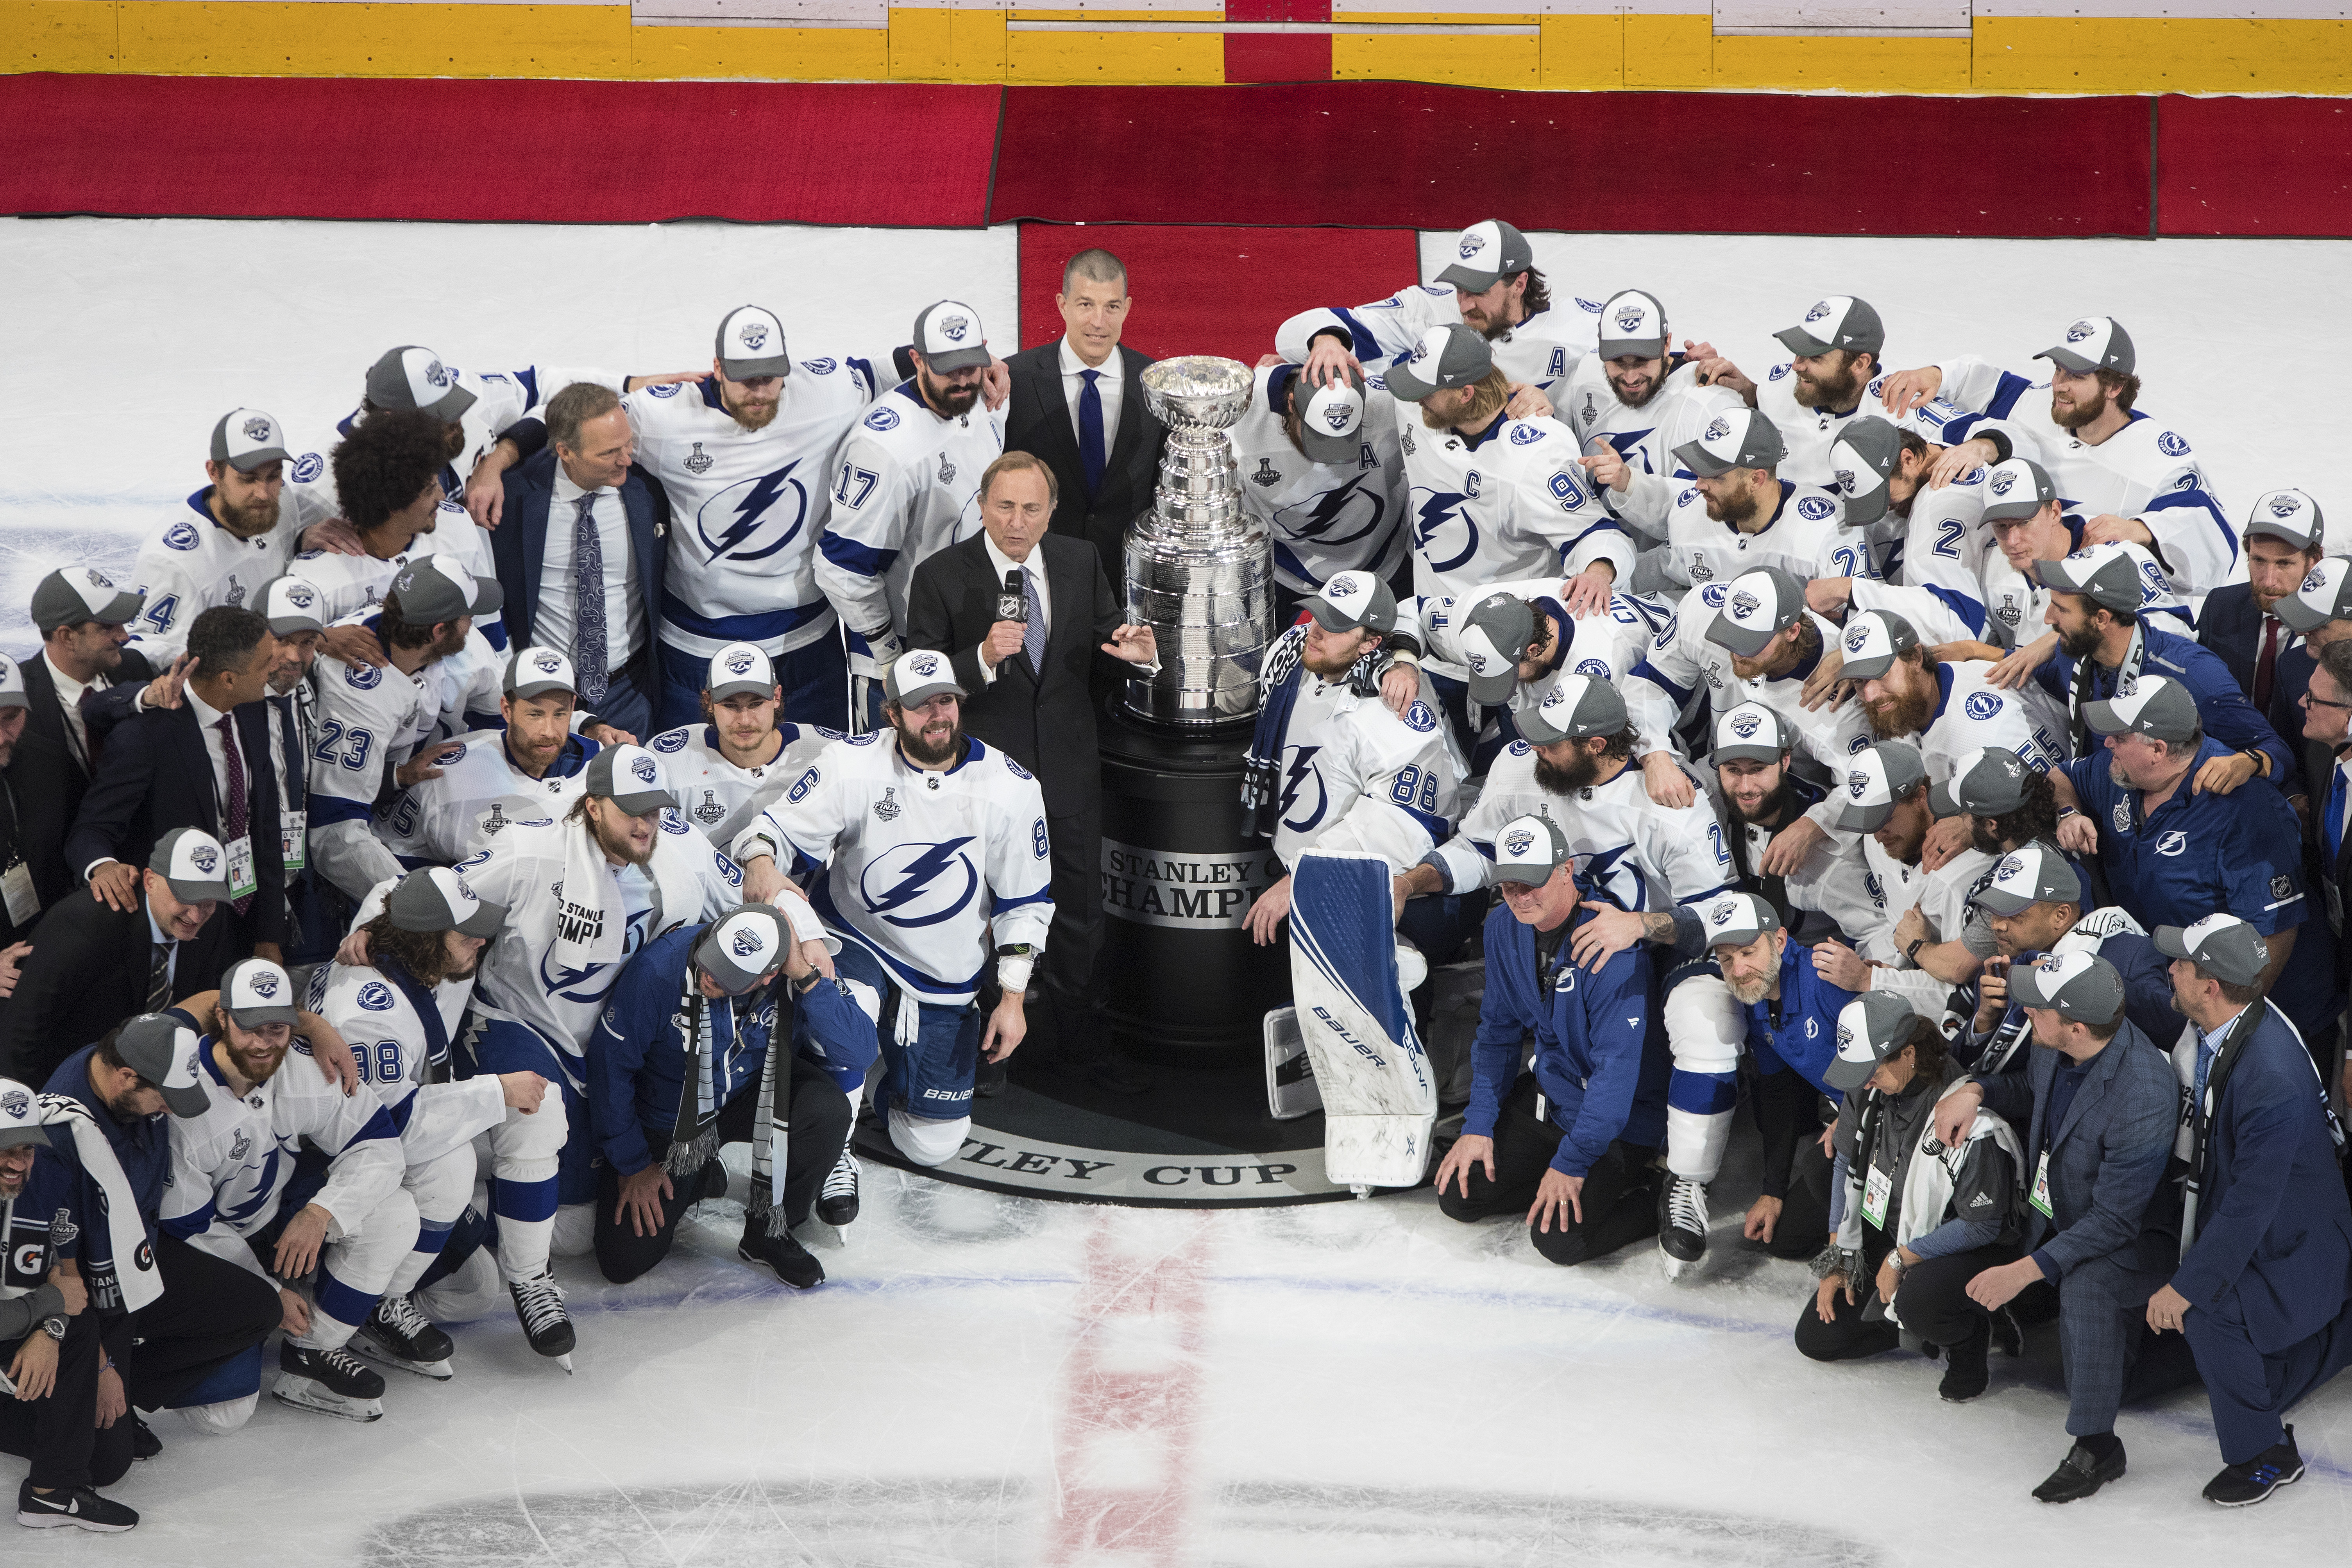 Tampa Bay Lightning at 30, ready to make another Stanley Cup Finals run